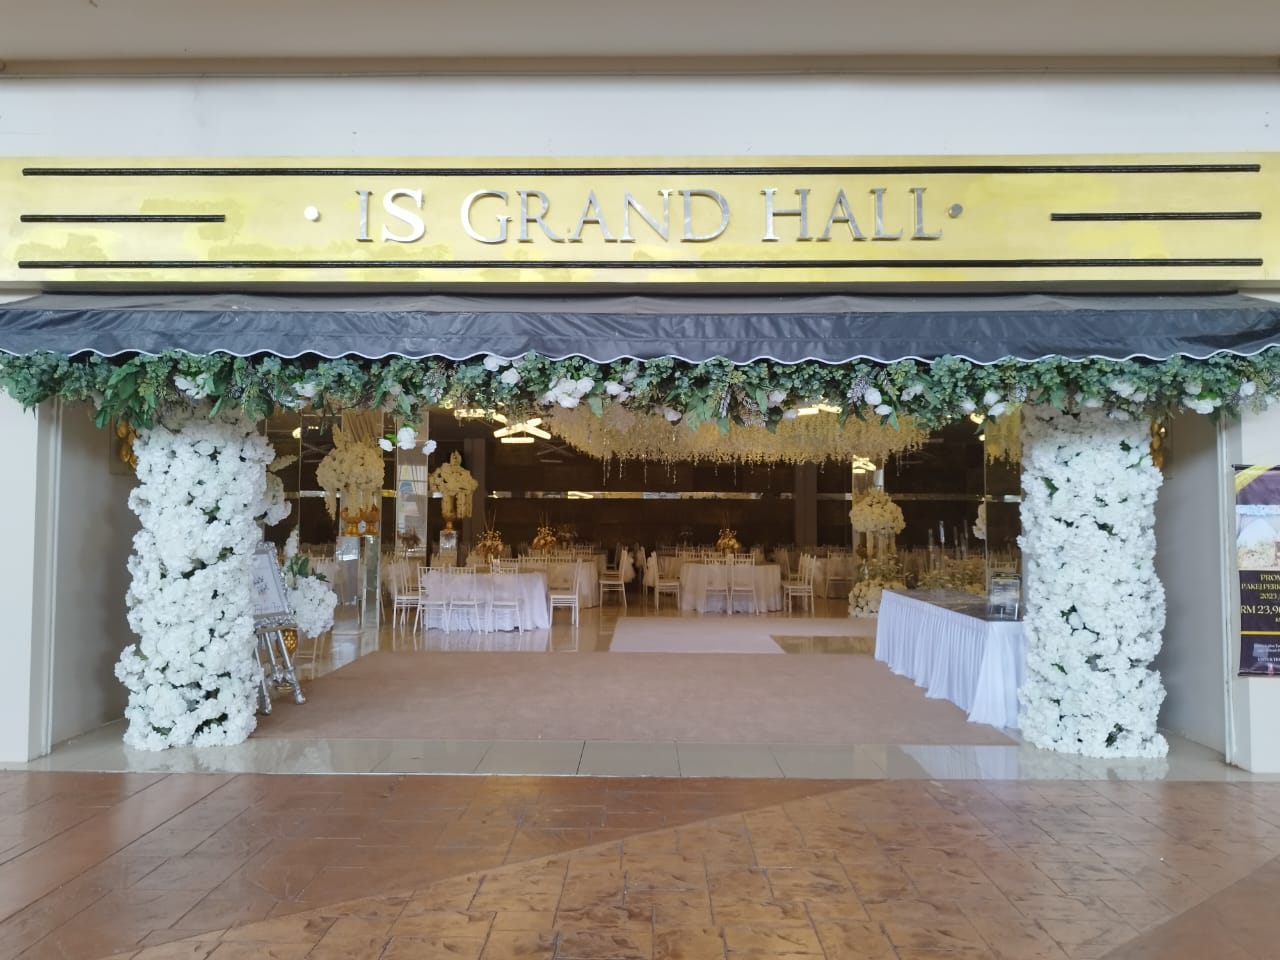 IS GRAND HALL